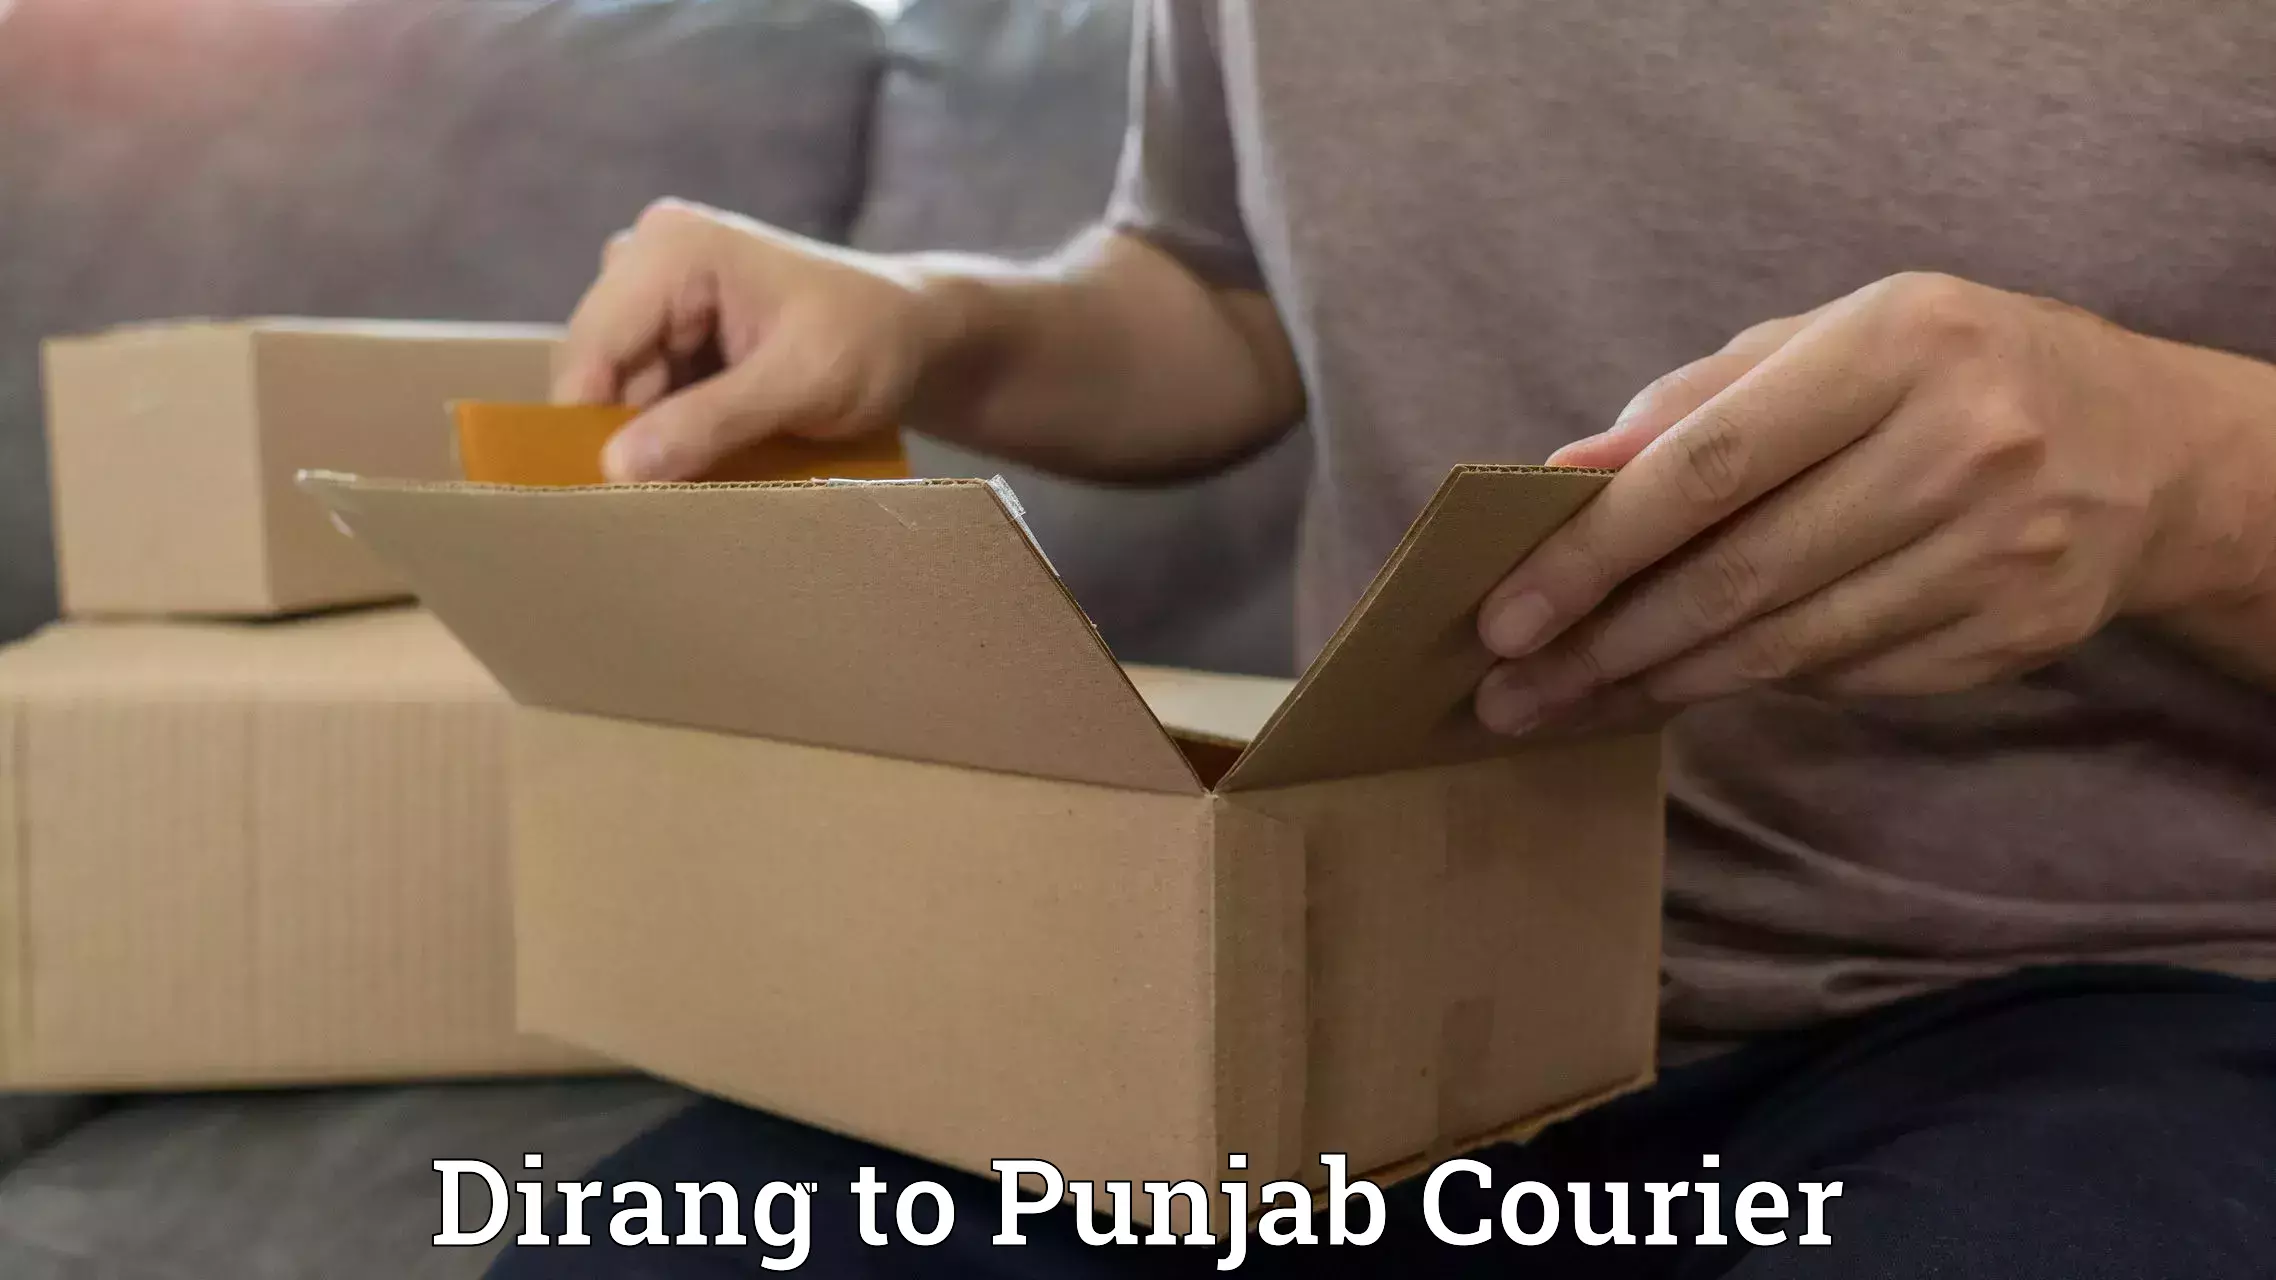 Package delivery network Dirang to Mohali